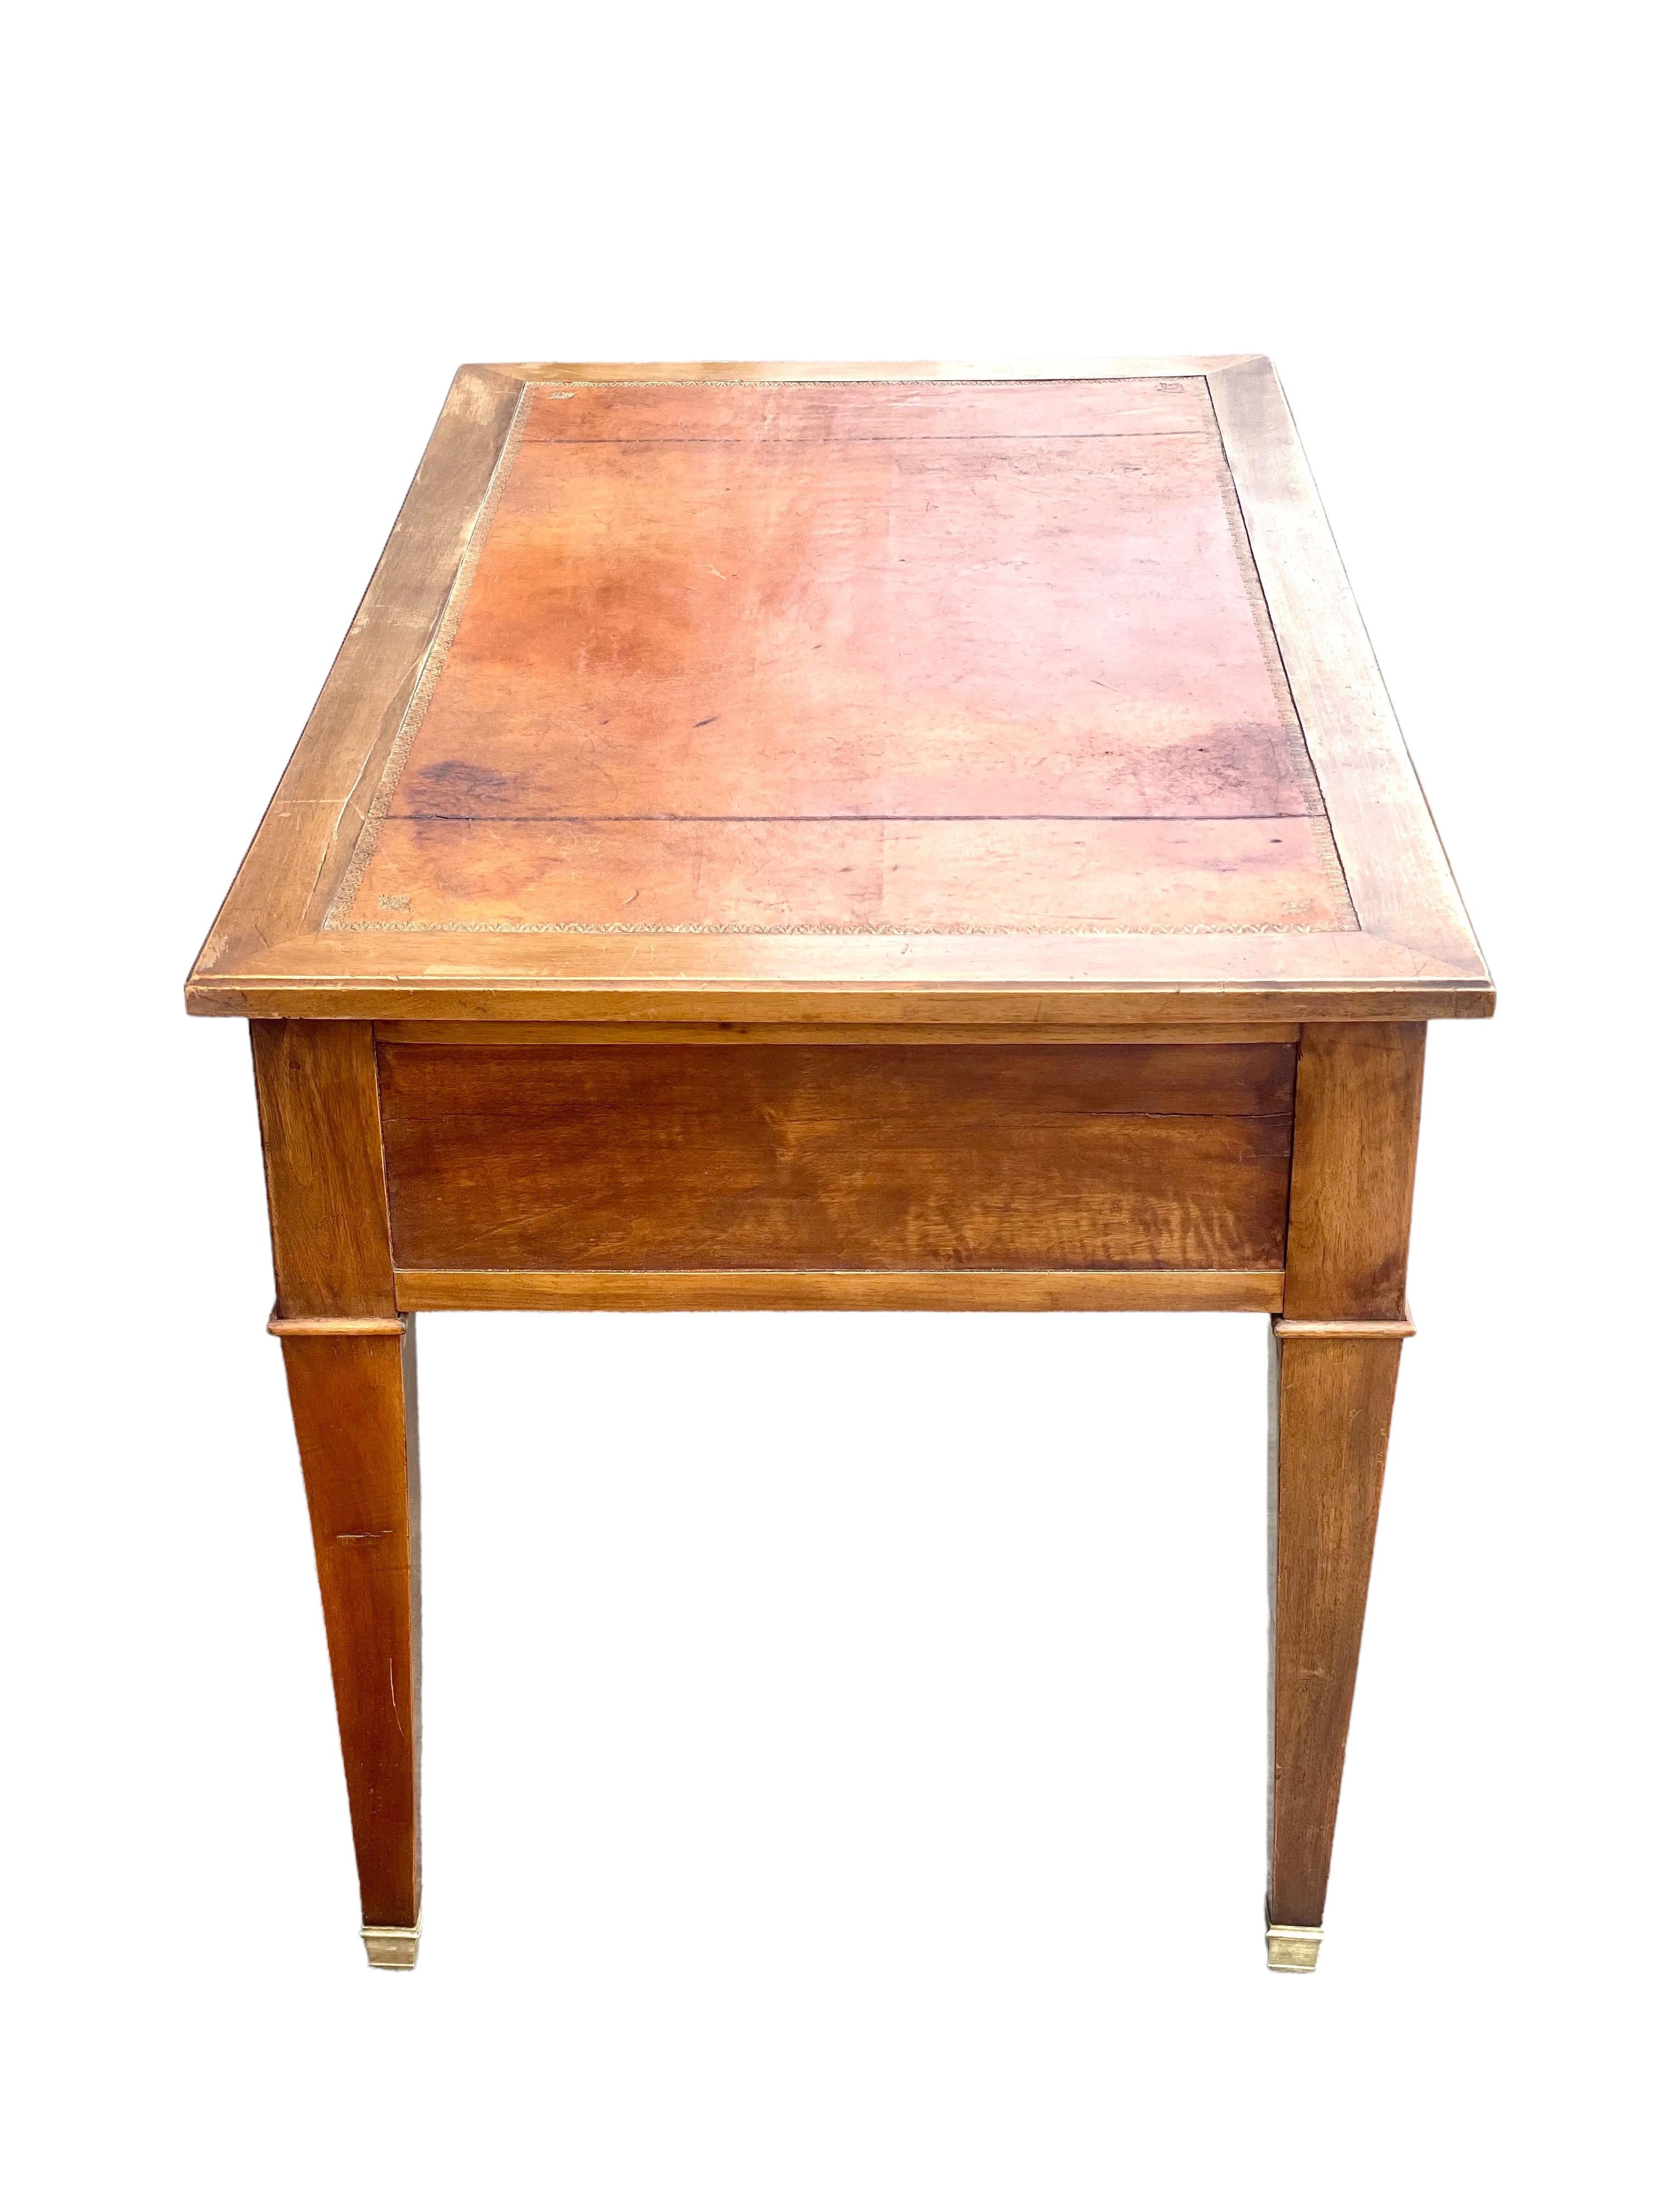 A lovely 19th century French leather-topped writing desk in warm-coloured walnut and veneer. Hand-crafted in the Louis XVI style, this charming desk has two lockable drawers complete with shield-shaped escutcheons (one key supplied). The rectangular